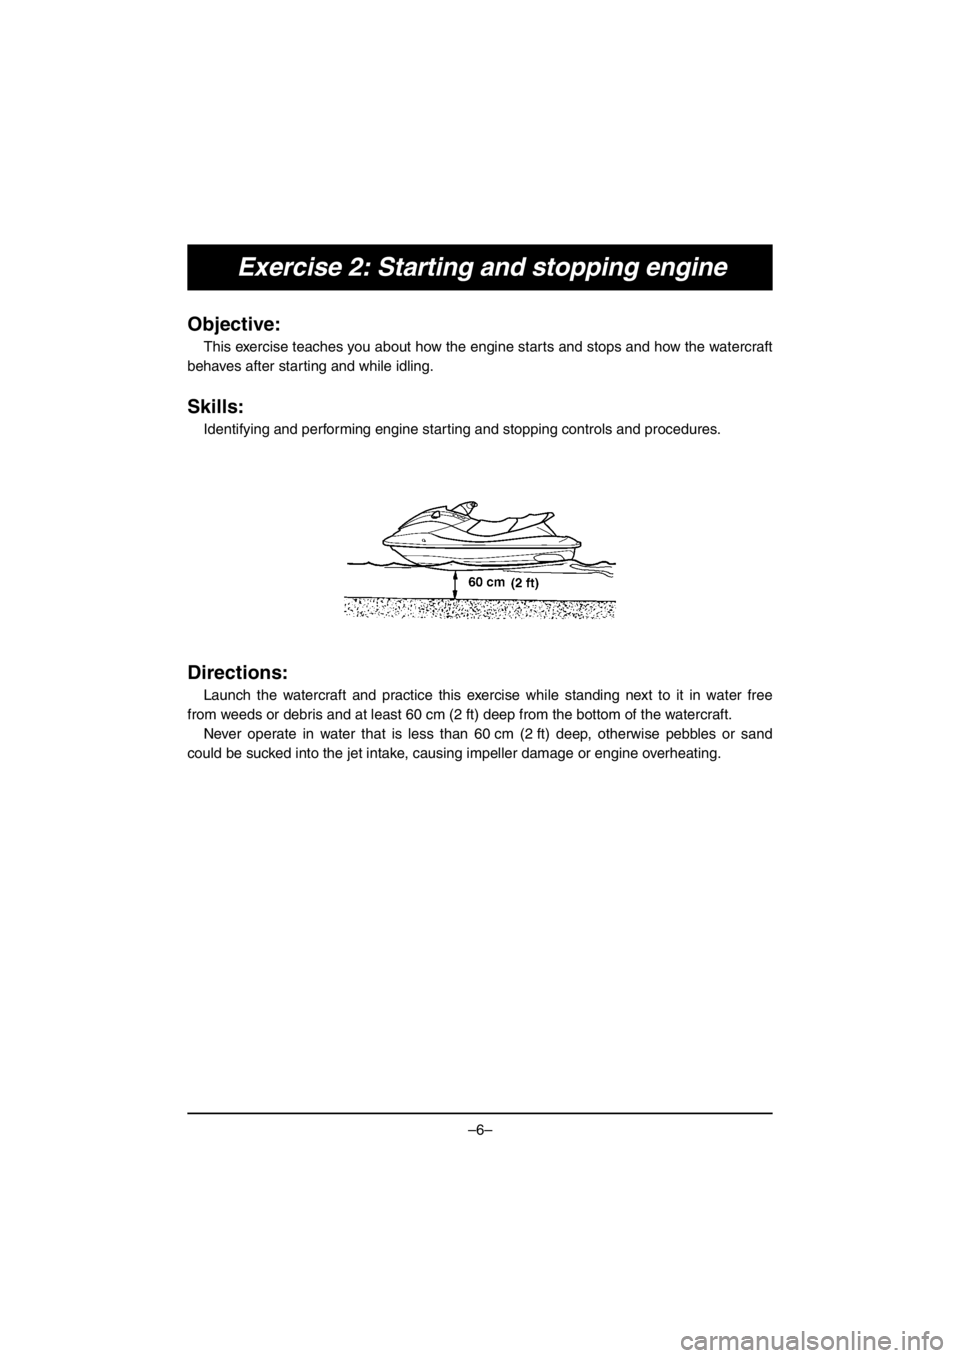 YAMAHA V1 2016  Manuale duso (in Italian) –6–
Exercise 2: Starting and stopping engine
Objective:
This exercise teaches you about how the engine starts and stops and how the watercraft
behaves after starting and while idling.
Skills:
Iden